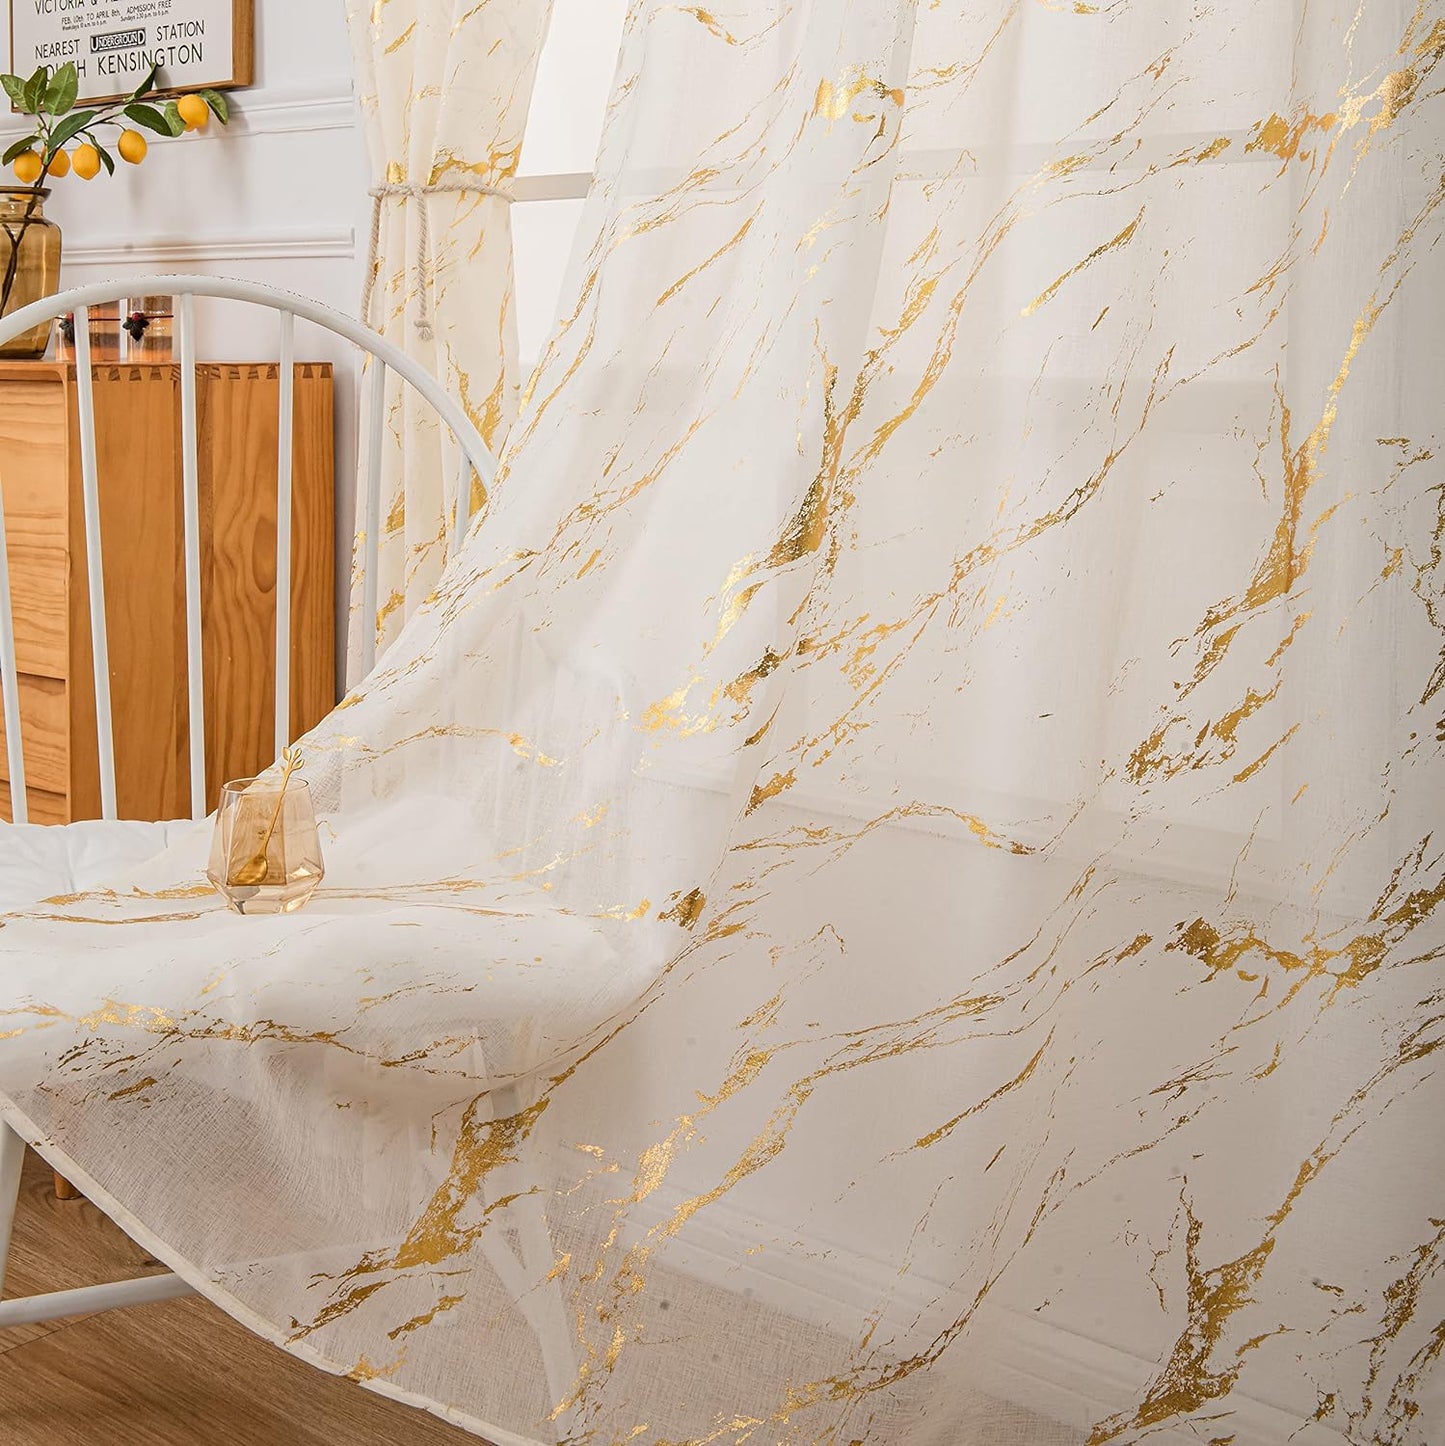 Sutuo Home Marble White Sheer Curtains 84 Inch Length, Gold Foil Print Metallic Bronzing, Privacy Window Treatment Decor Abstract Drape Pair 2 Panels Set for Bedroom Kitchen Living Room 52" W X 84" L  Sutuo Home Gold And Ivory 52" W X 96" L, 2 Panels 